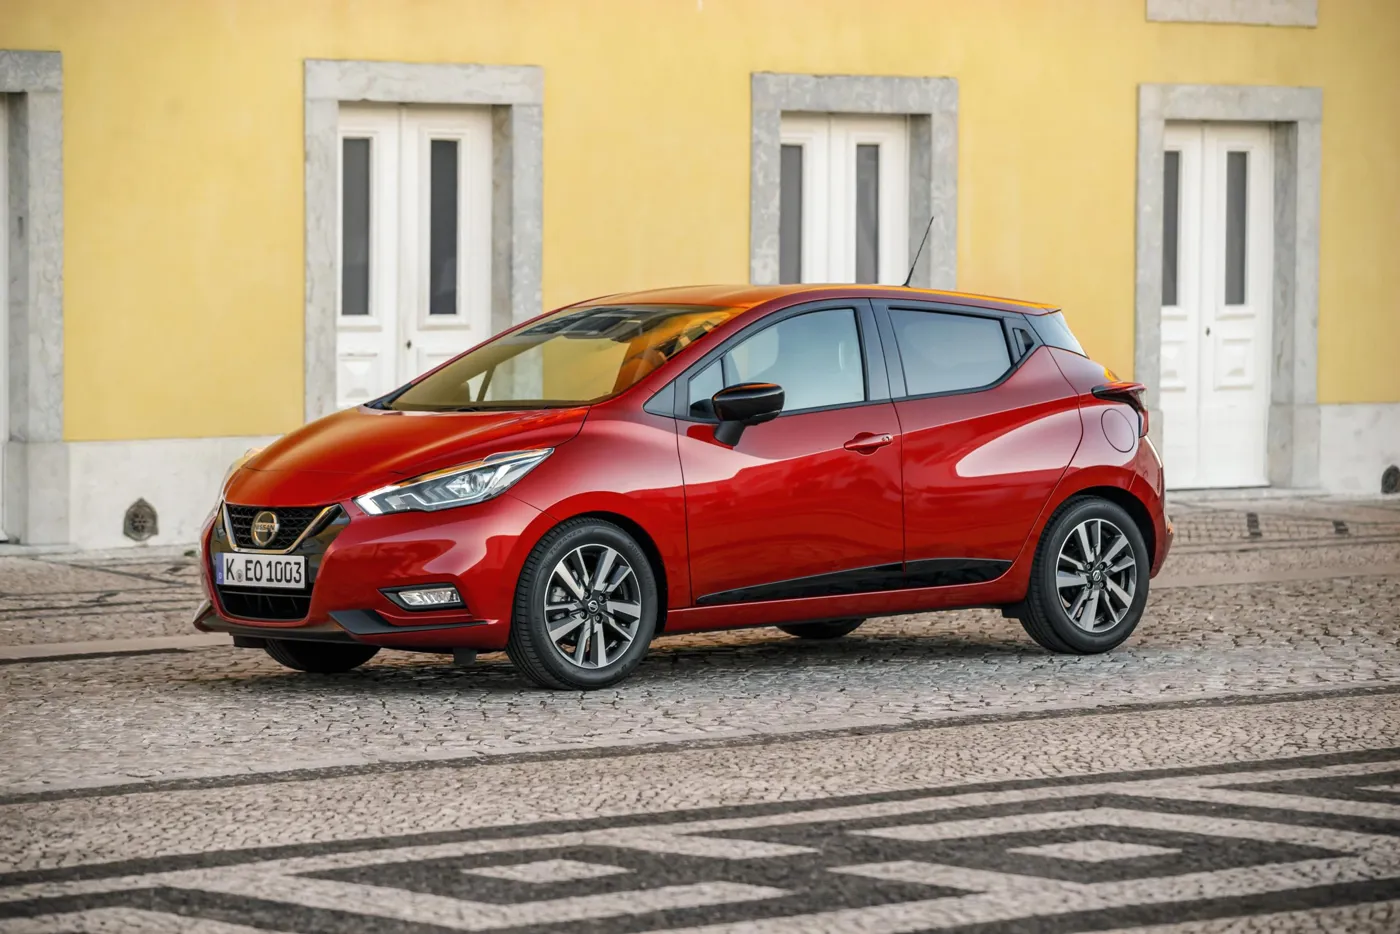 Revised engine line-up and lower CO2 for 2019 Nissan Micra supermini